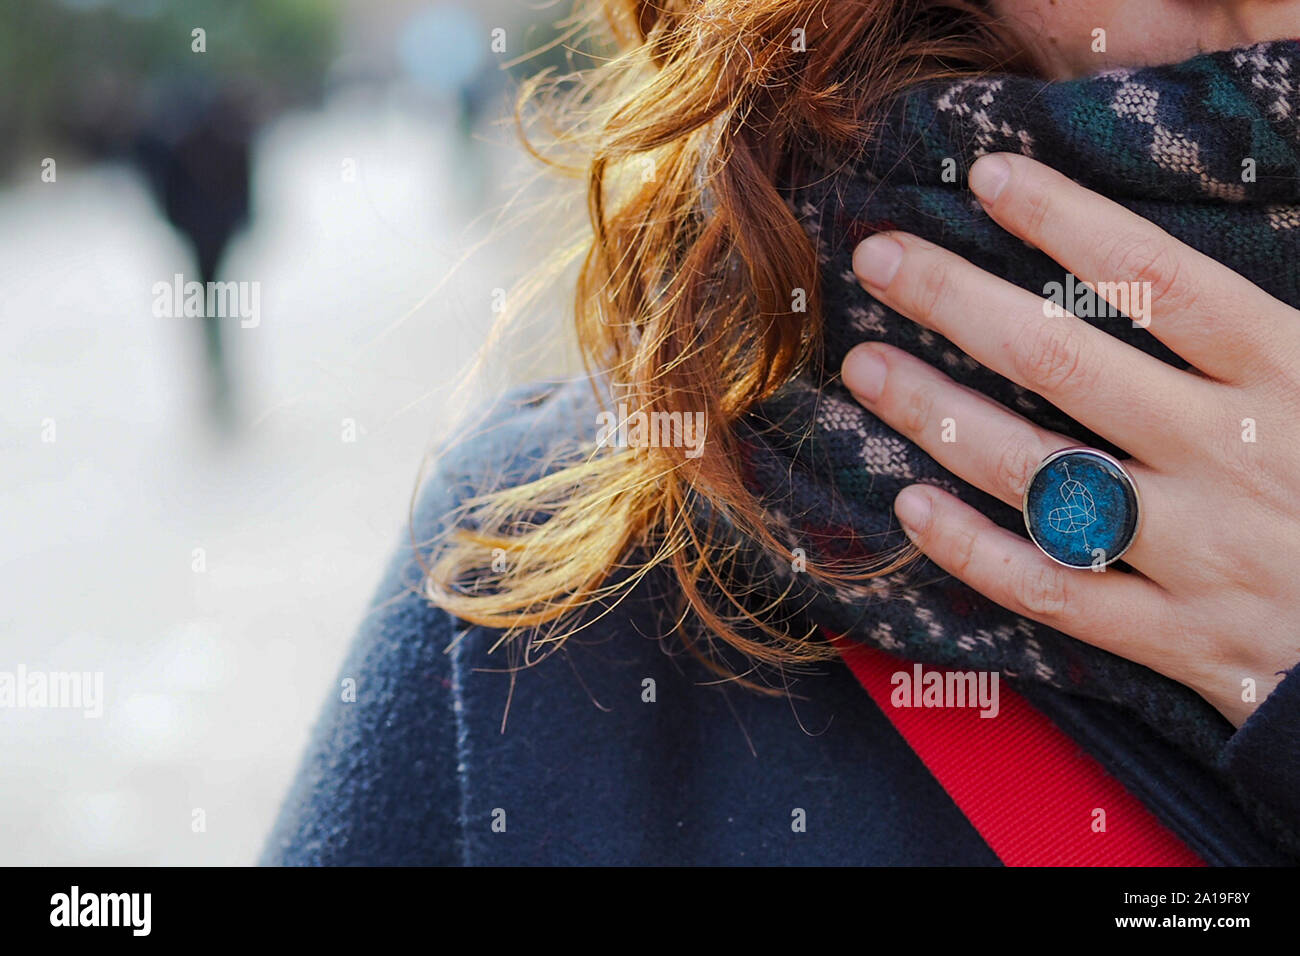 Woman close-up on a cold winter morning Stock Photo